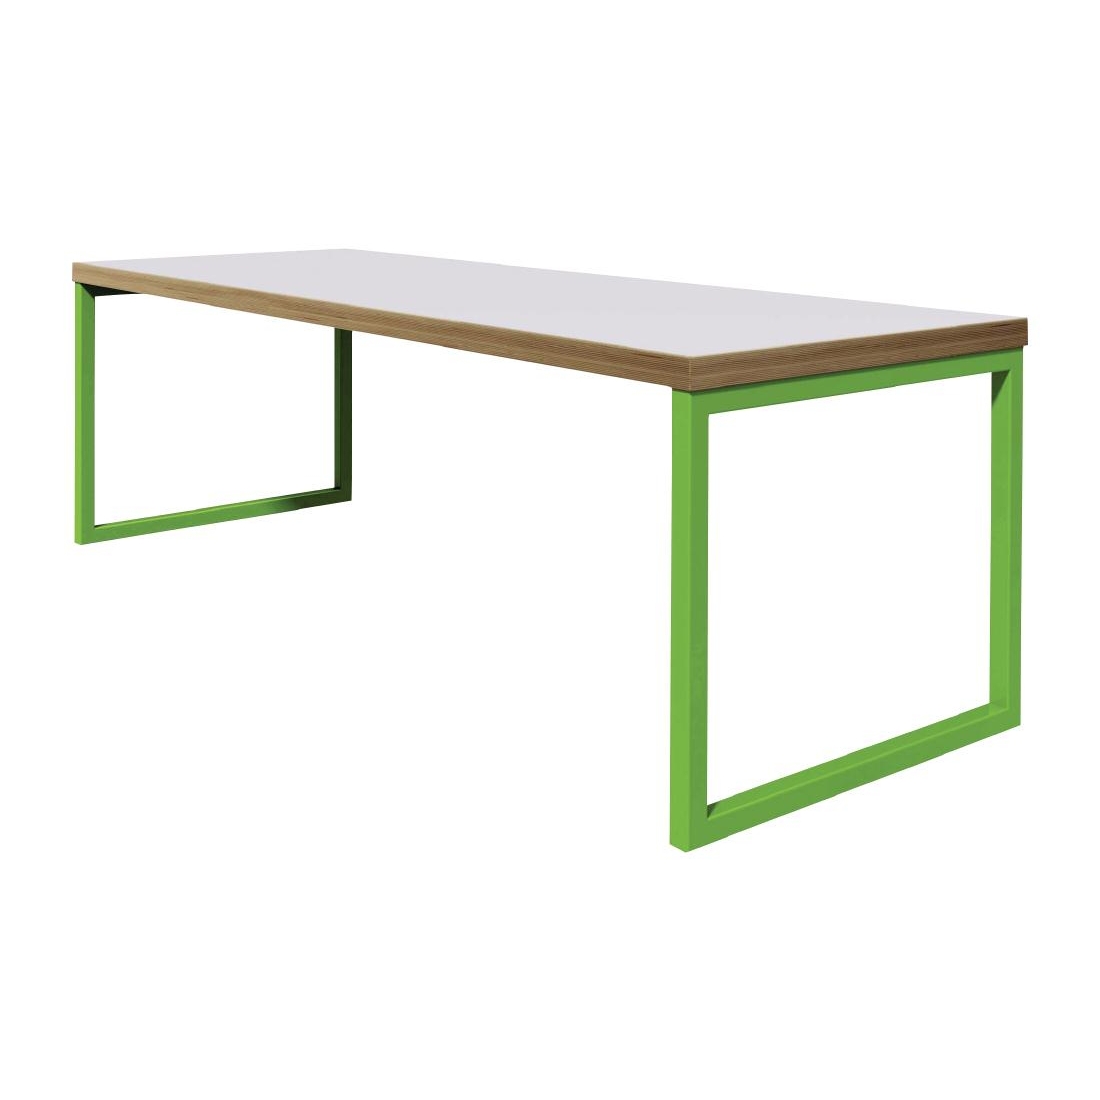 Bolero Dining Table White with Green Frame 7ft